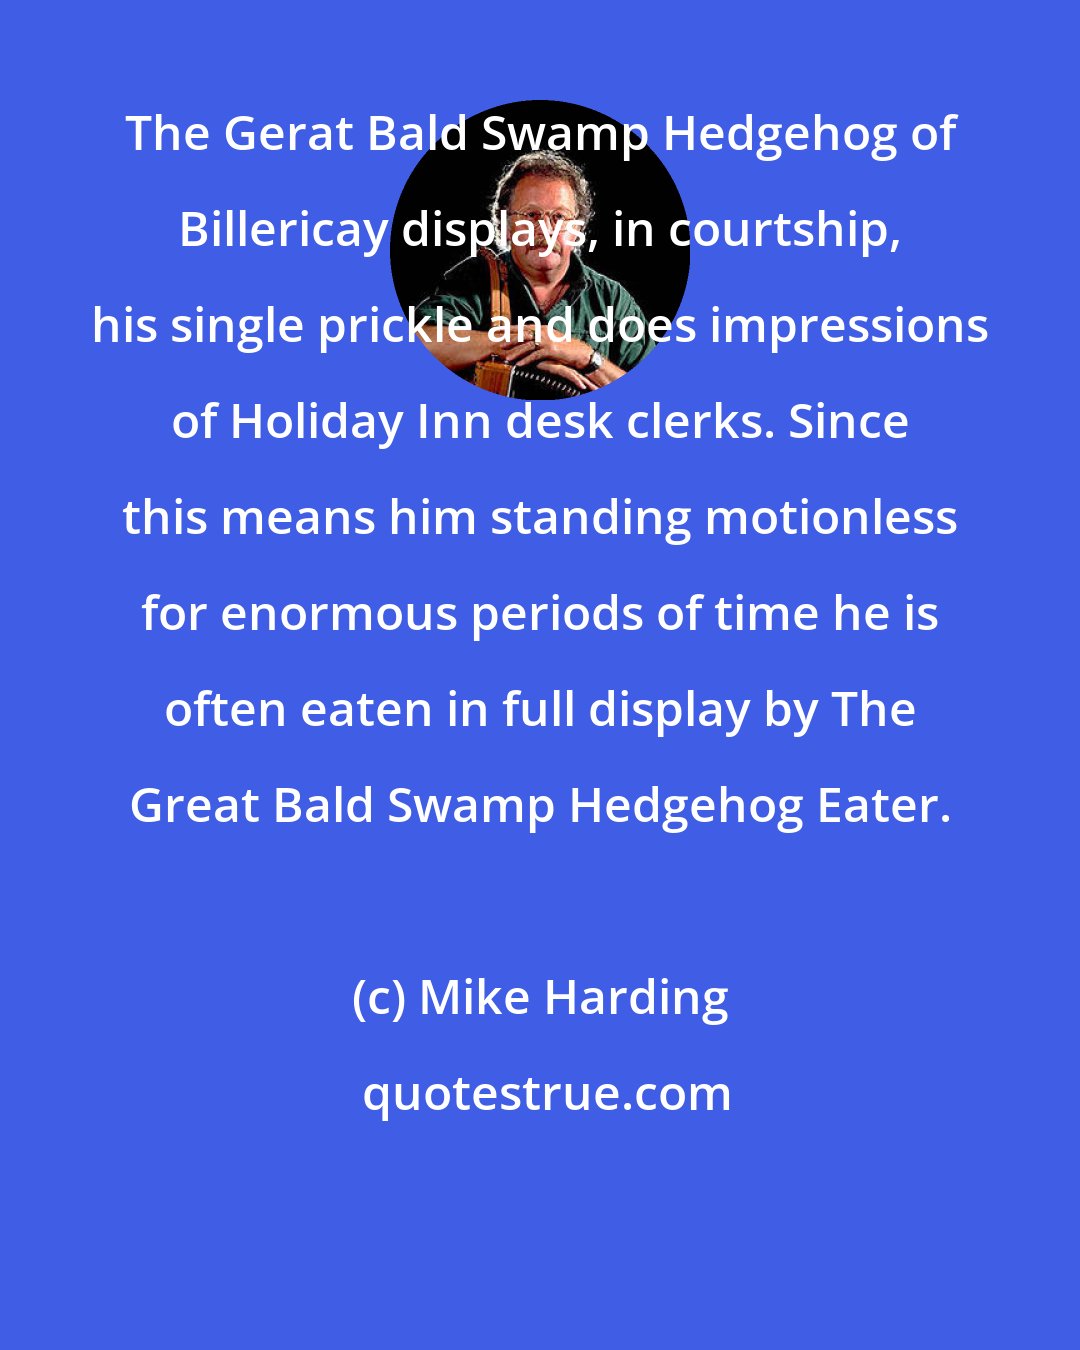 Mike Harding: The Gerat Bald Swamp Hedgehog of Billericay displays, in courtship, his single prickle and does impressions of Holiday Inn desk clerks. Since this means him standing motionless for enormous periods of time he is often eaten in full display by The Great Bald Swamp Hedgehog Eater.